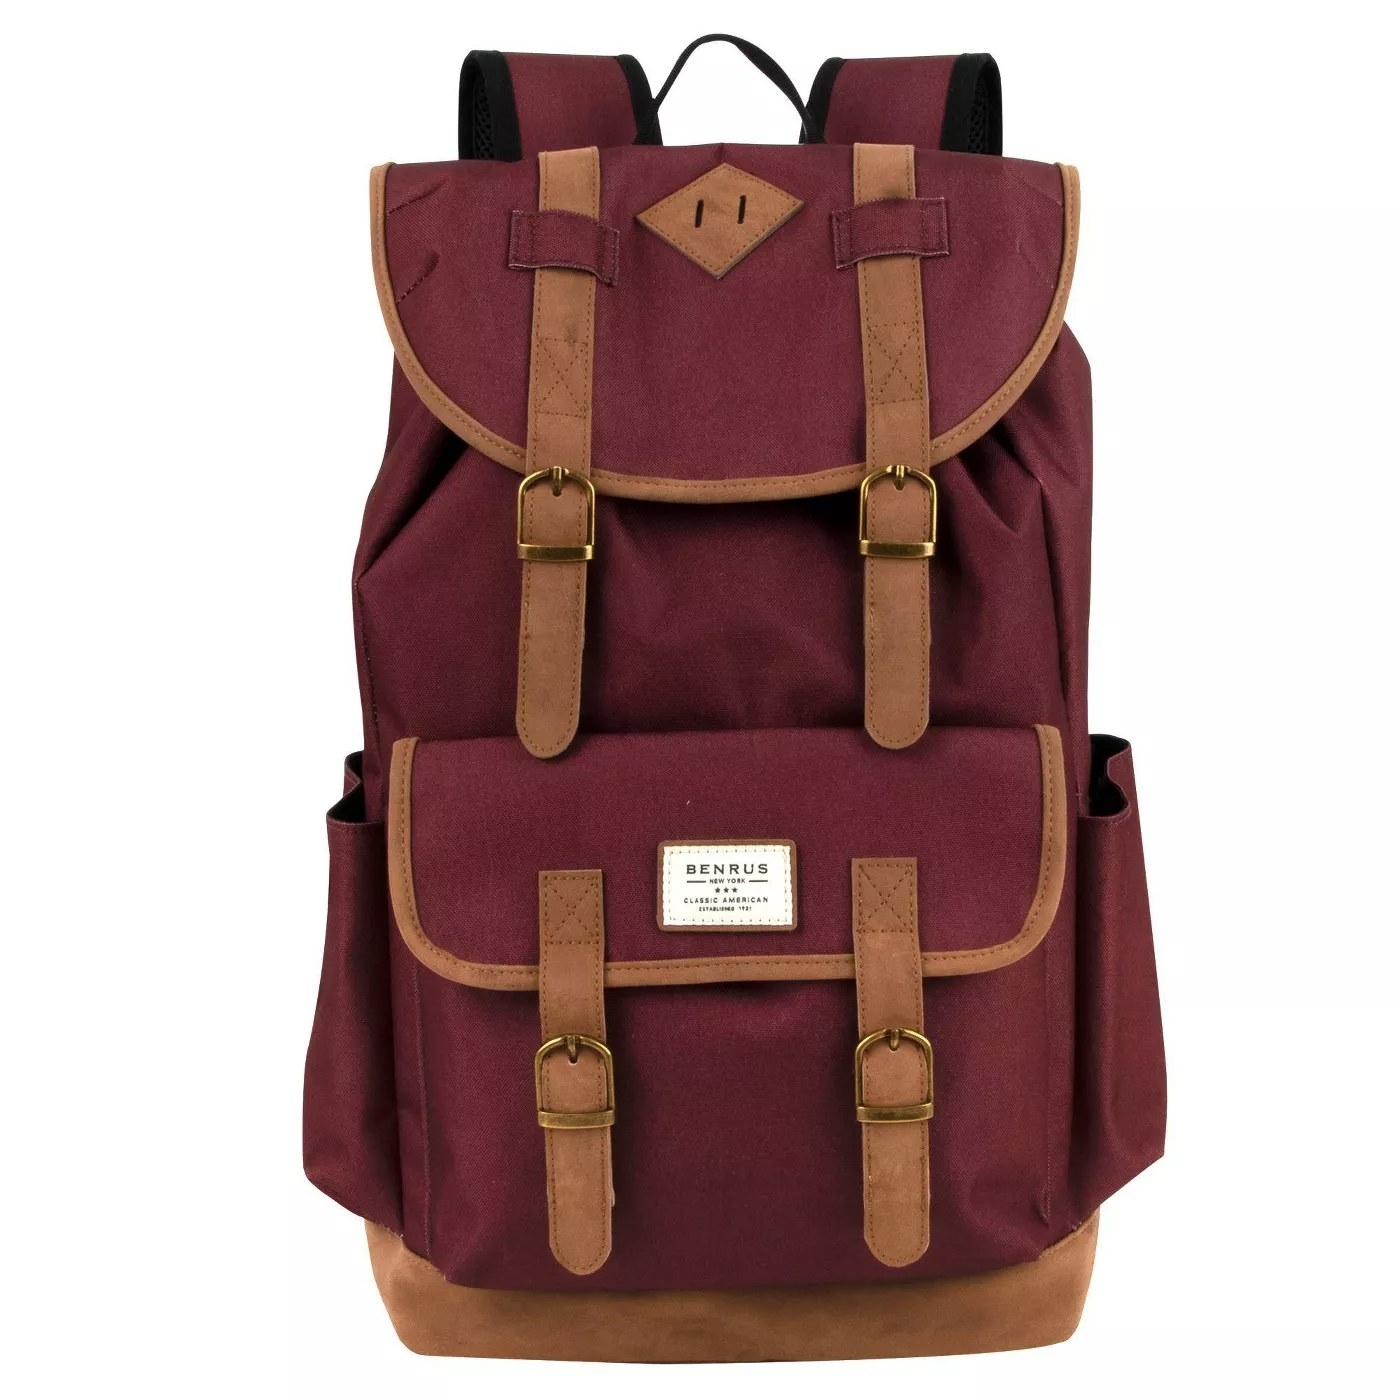 The Benrus rucksack in maroon and brown